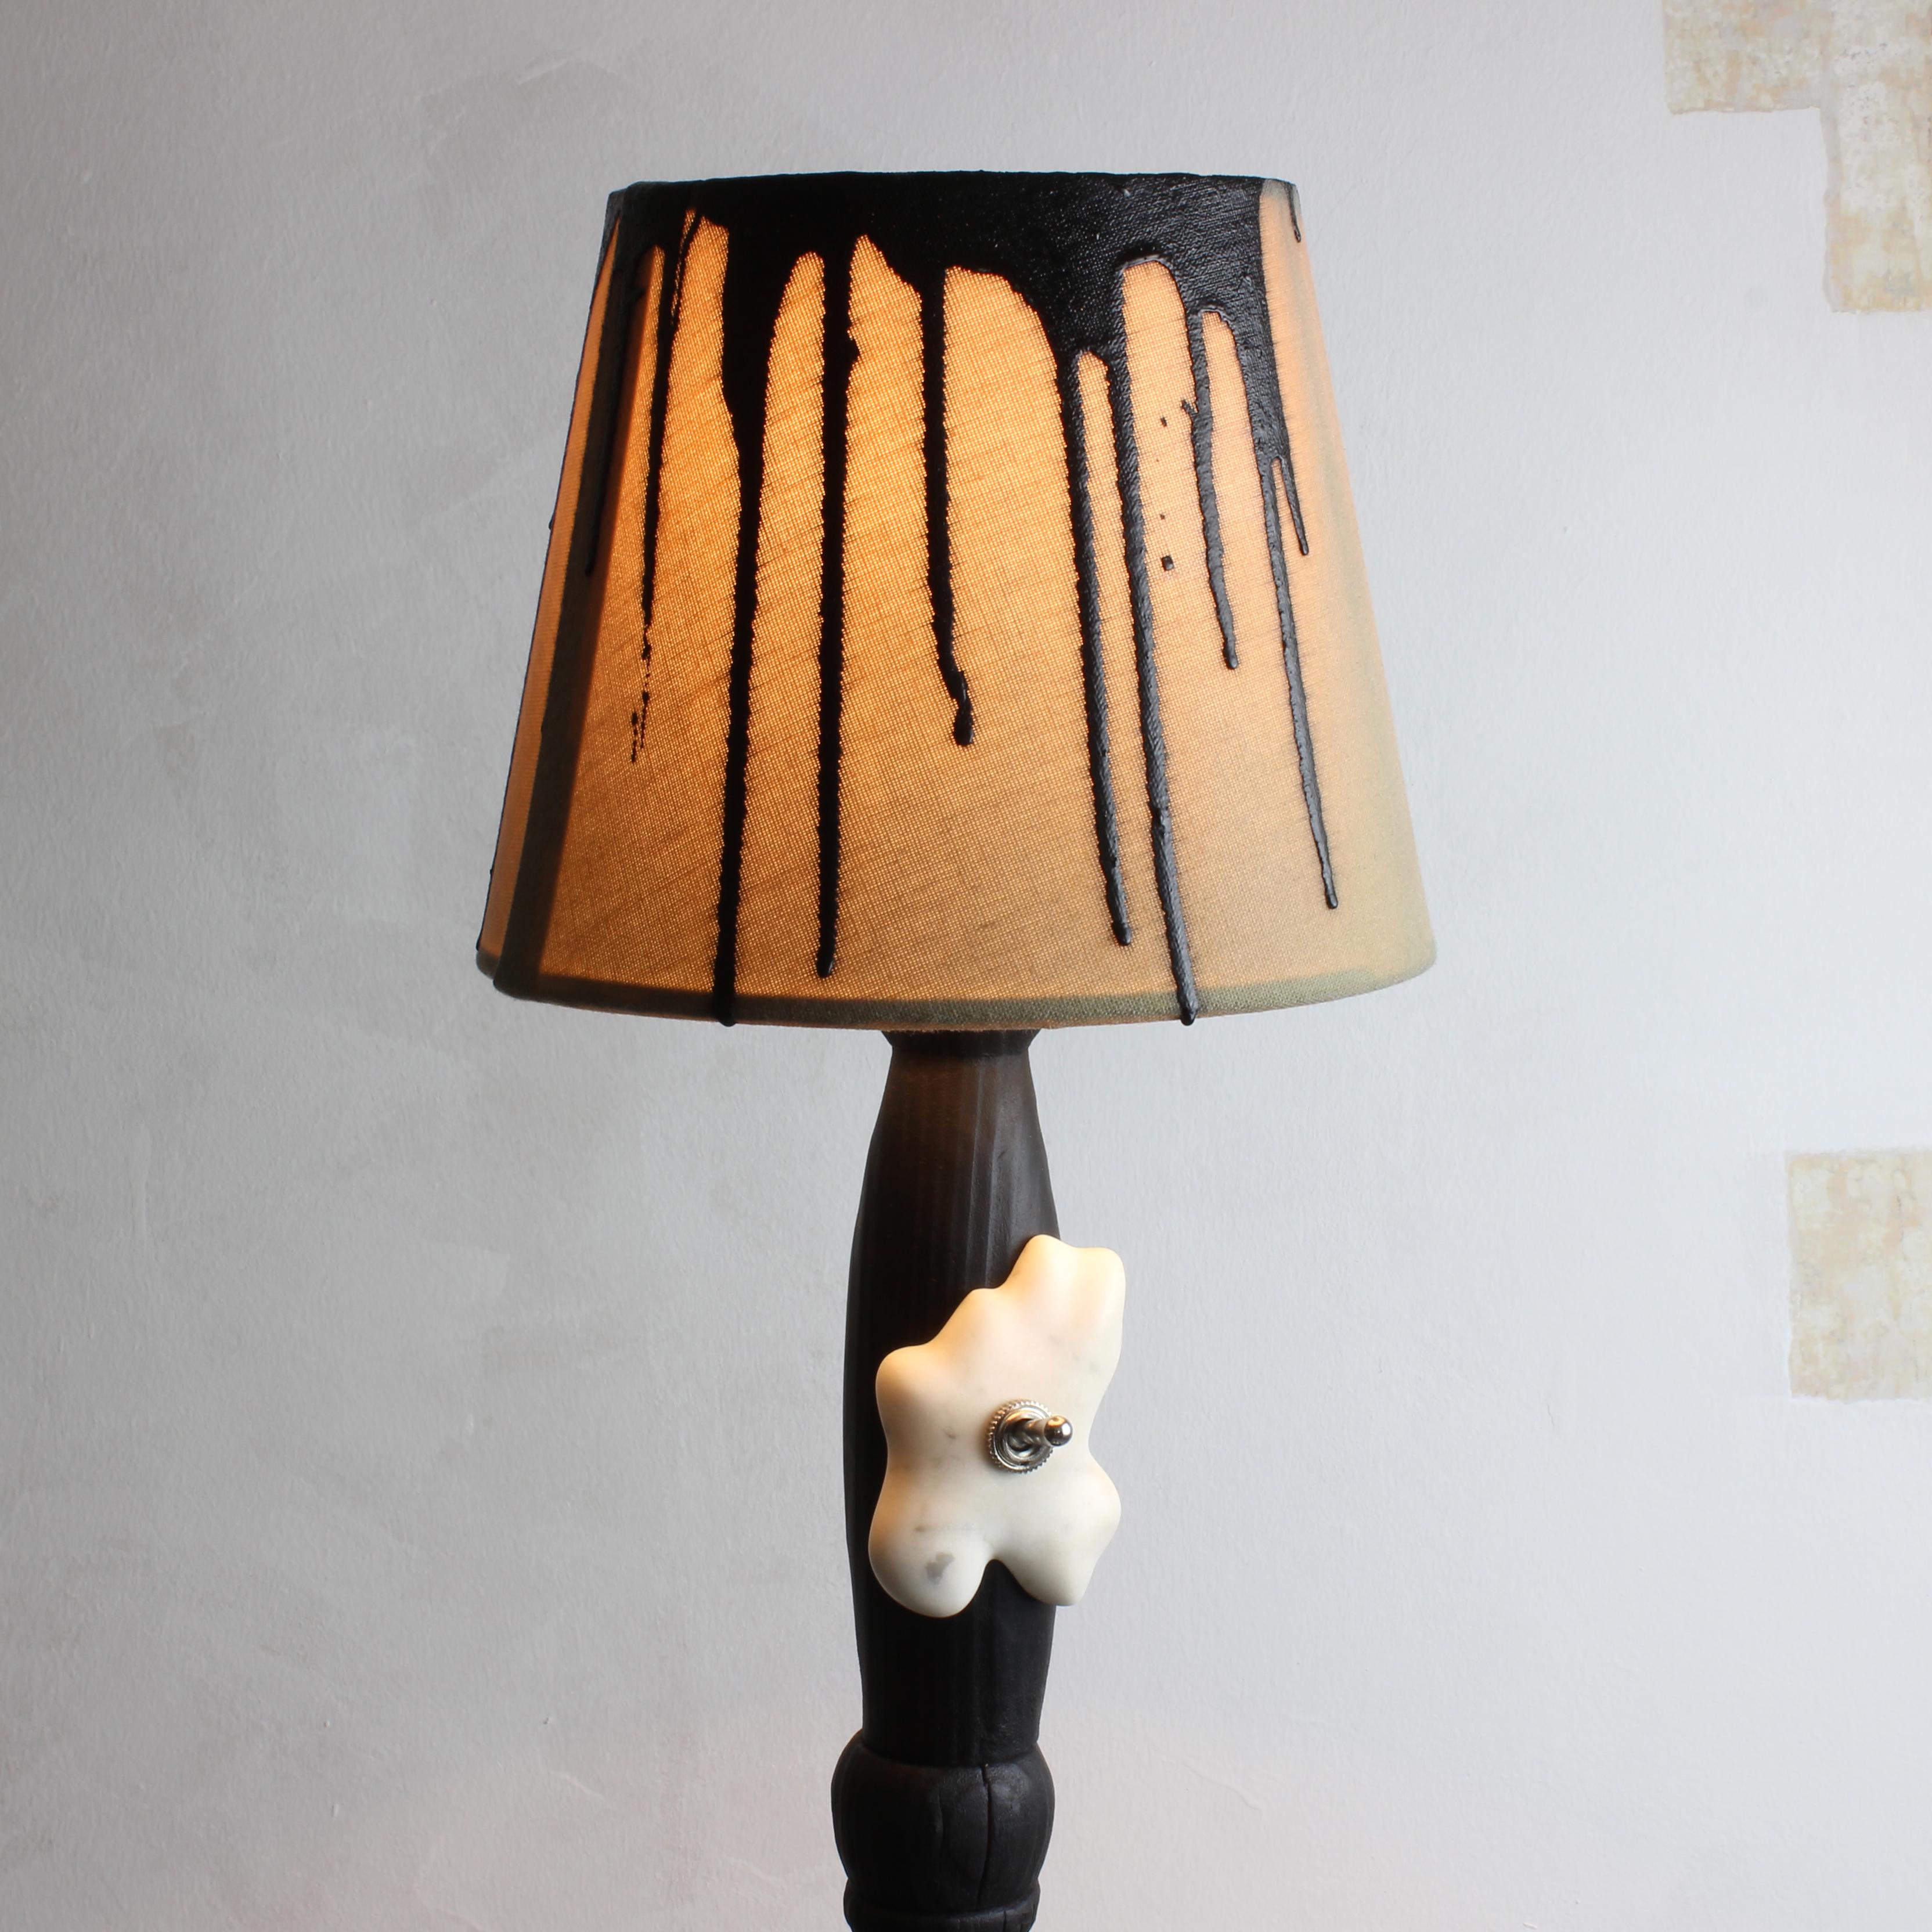 Tundra - Sculptured Lighting, Floor Lamp from Reclaimed Burned Wood and Marble In New Condition For Sale In Budapest, HU